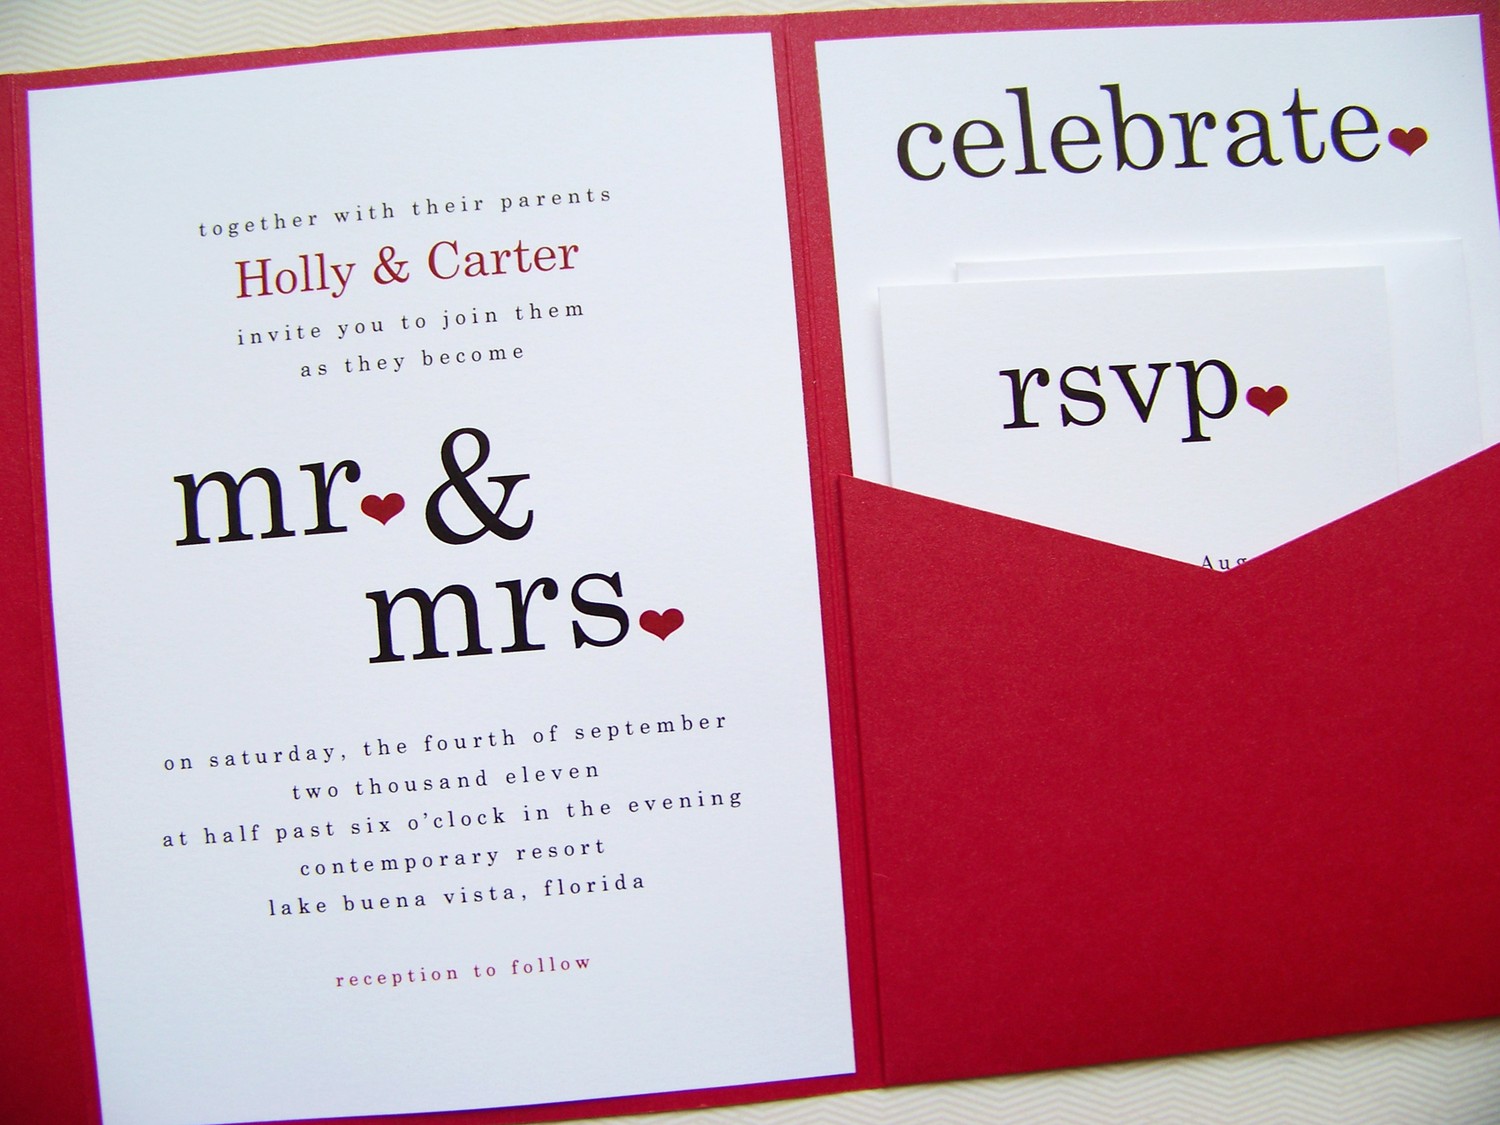 Here are some unique wedding invitations that we’ve found on the 